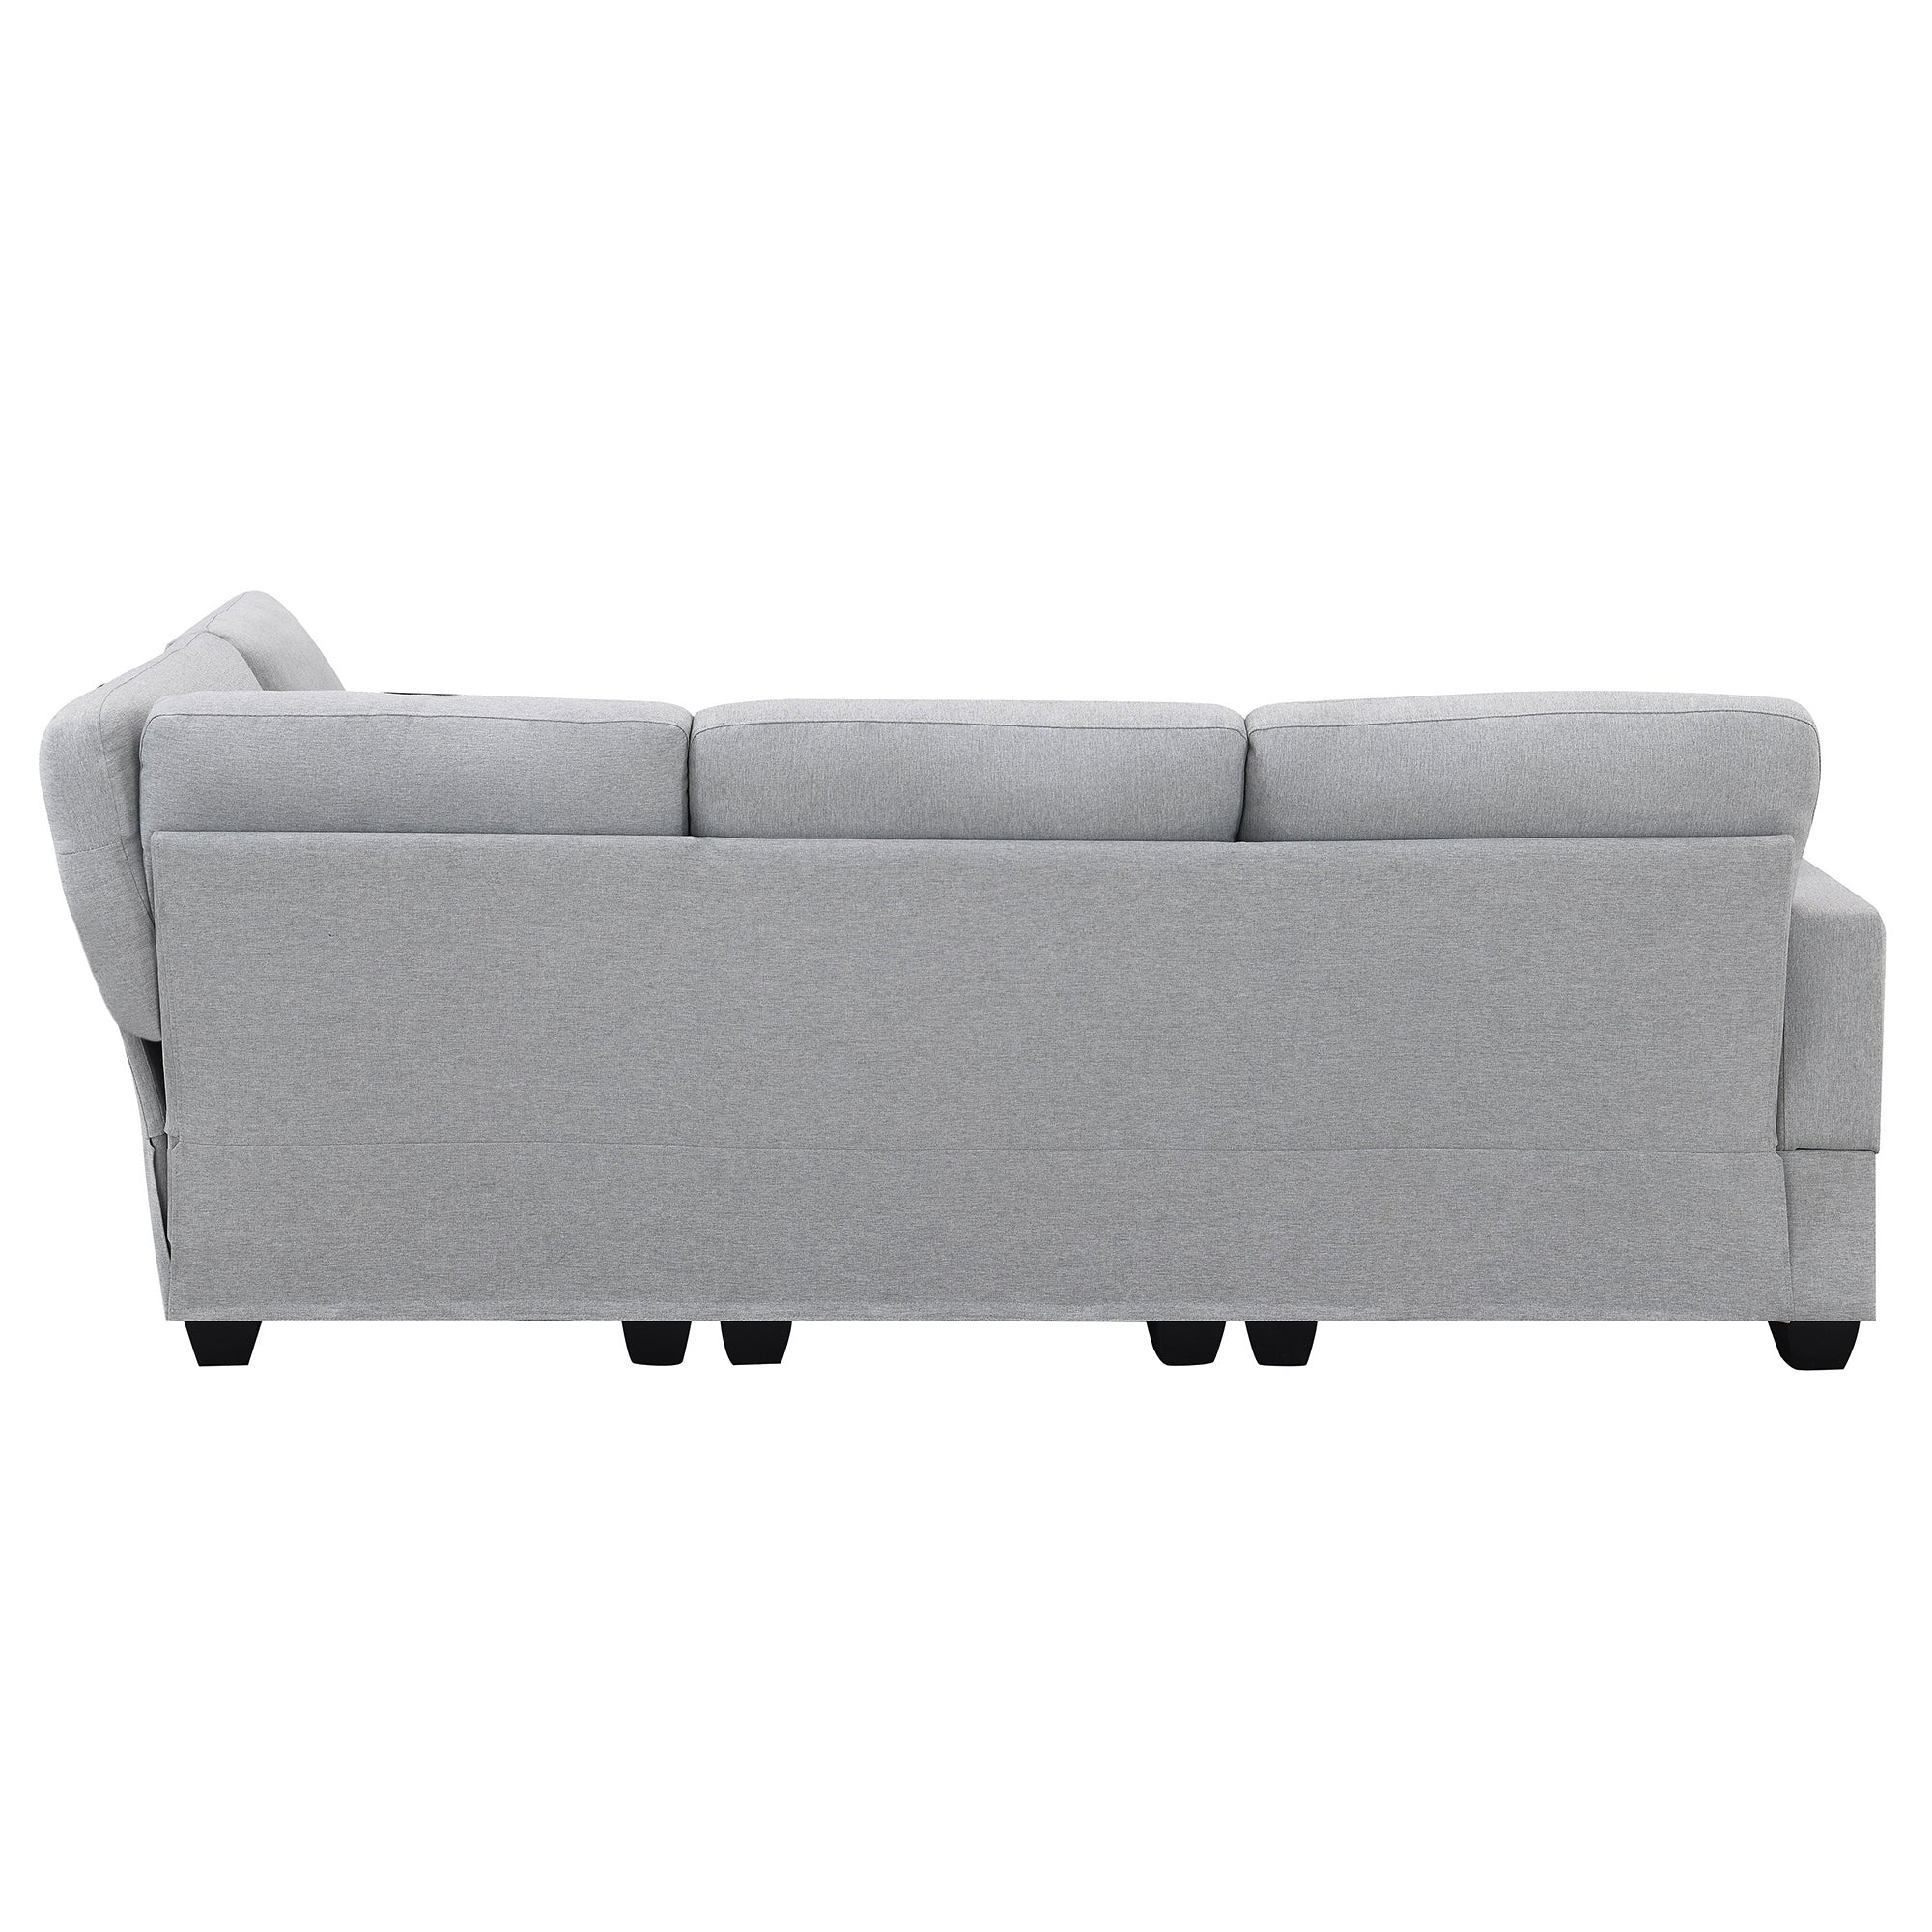 Gray L Shaped Sectional Sofa with Convertible Ottoman | Linen Fabric-Stationary Sectionals-American Furniture Outlet